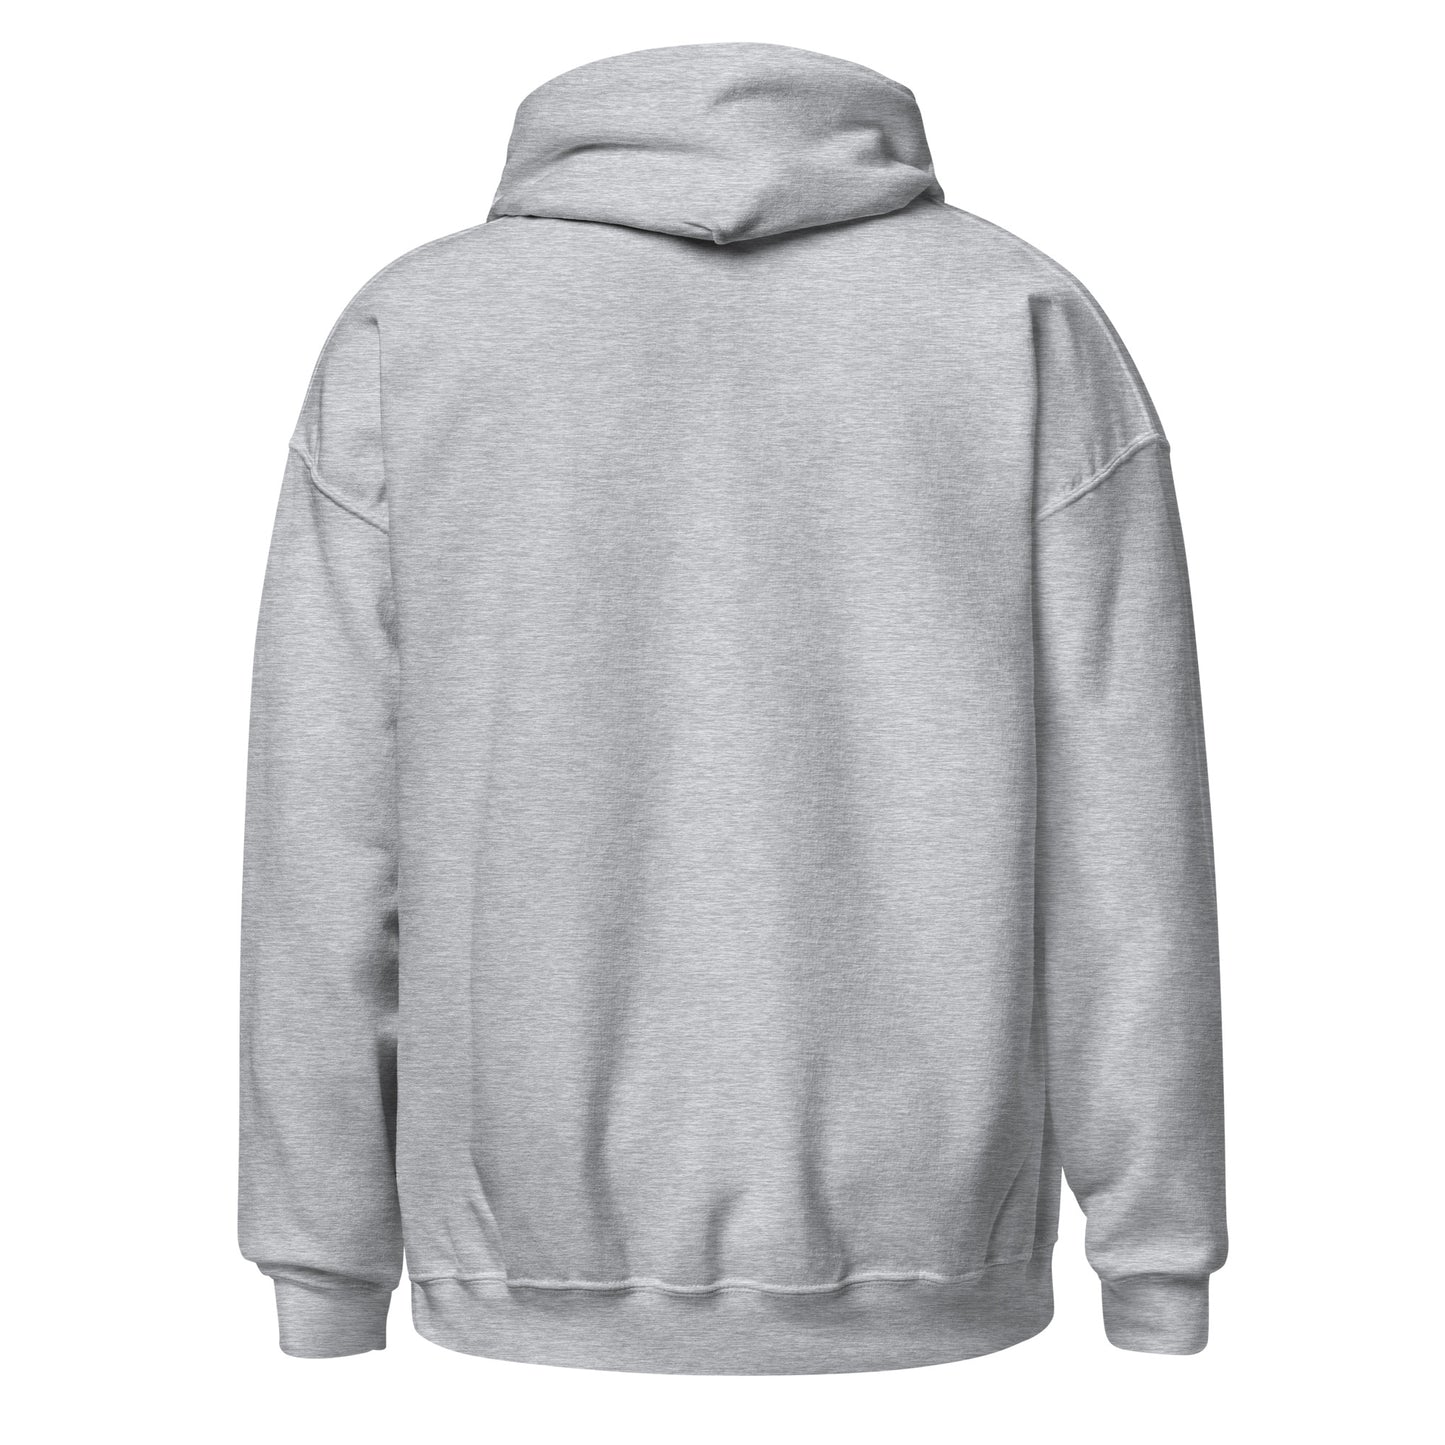 Pay Me Like a White Man Pink & Gray Hoodie